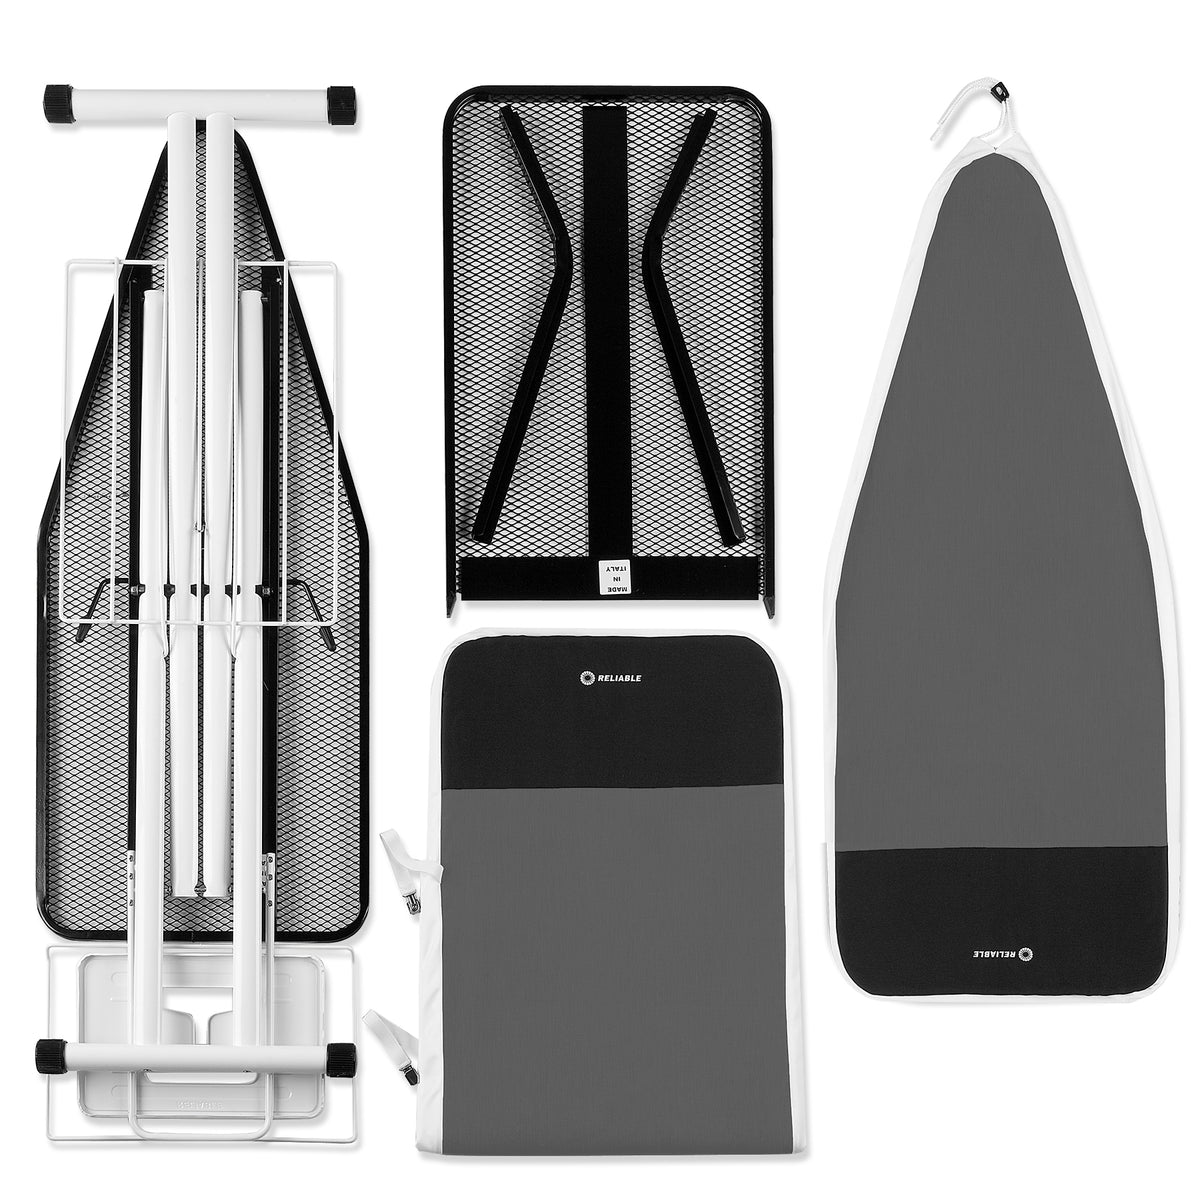 The Quilters Ironing Board! 320LB 2-in-1 Premium Home Ironing Board W/ Verafoam Cover Set